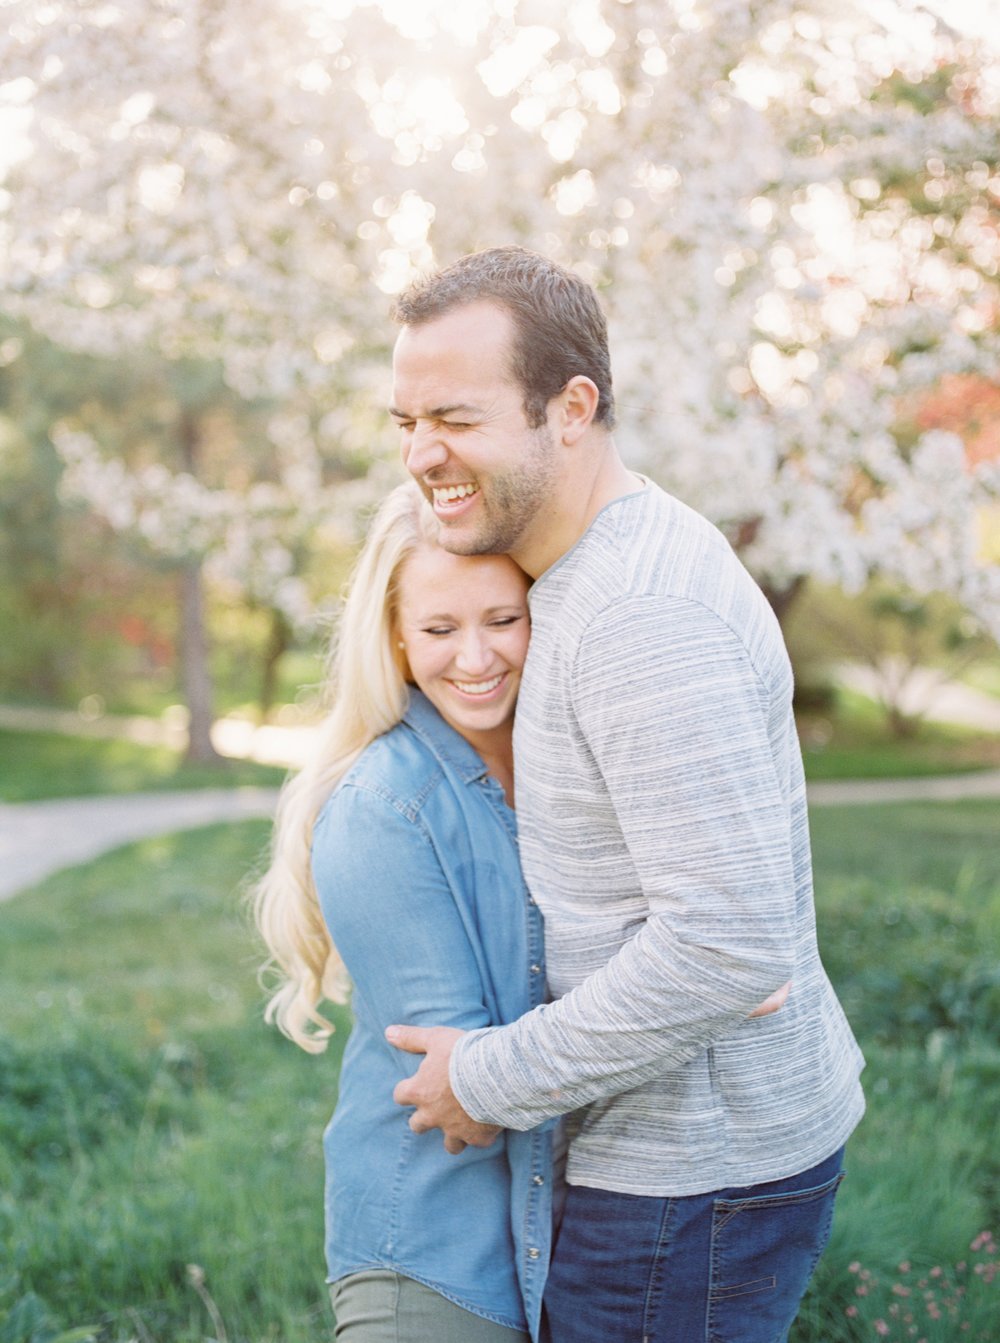 Balboa Park Engagement Session In San Diego California